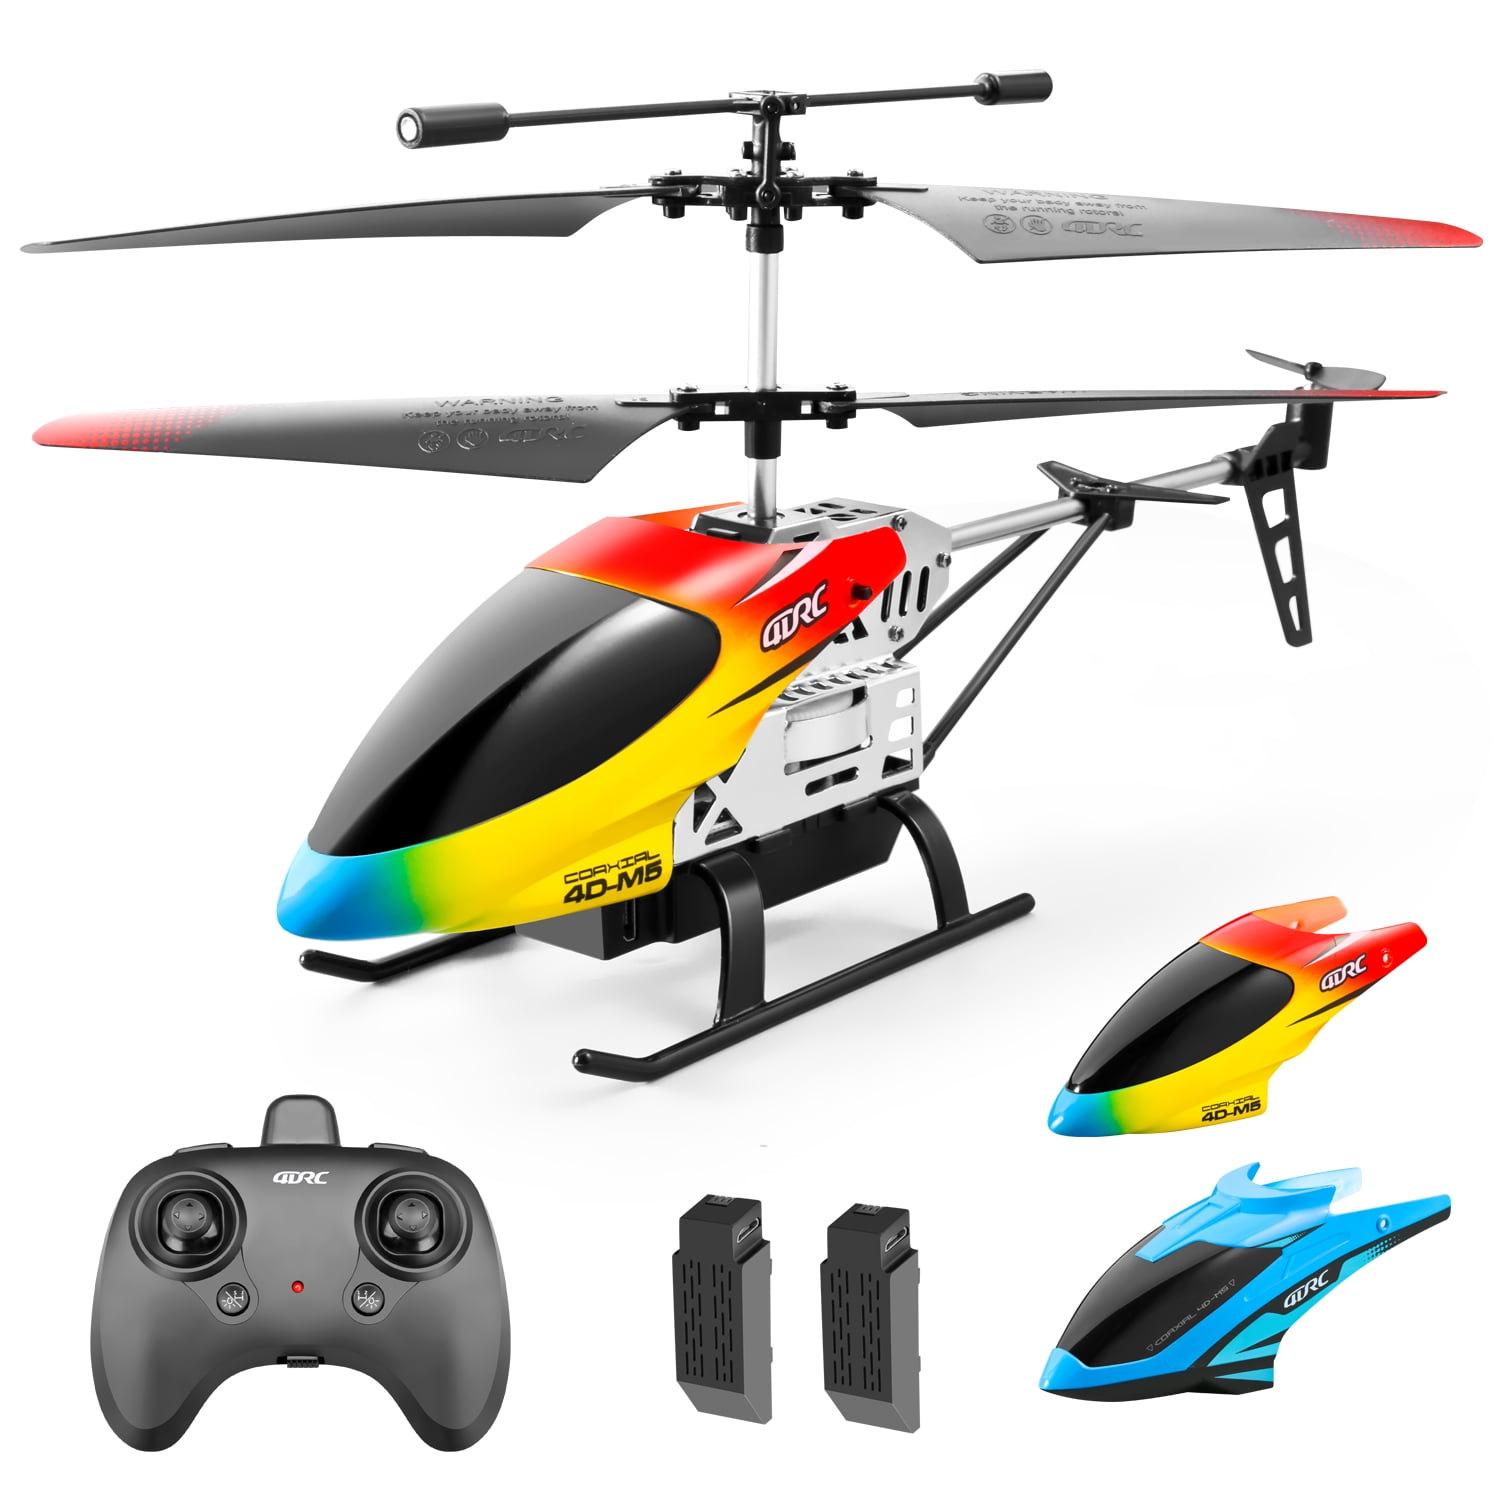 2.4G RC Helicopter 3.5CH Toys Electric Indoor Remote Control Aeroplane Xmas Gift 